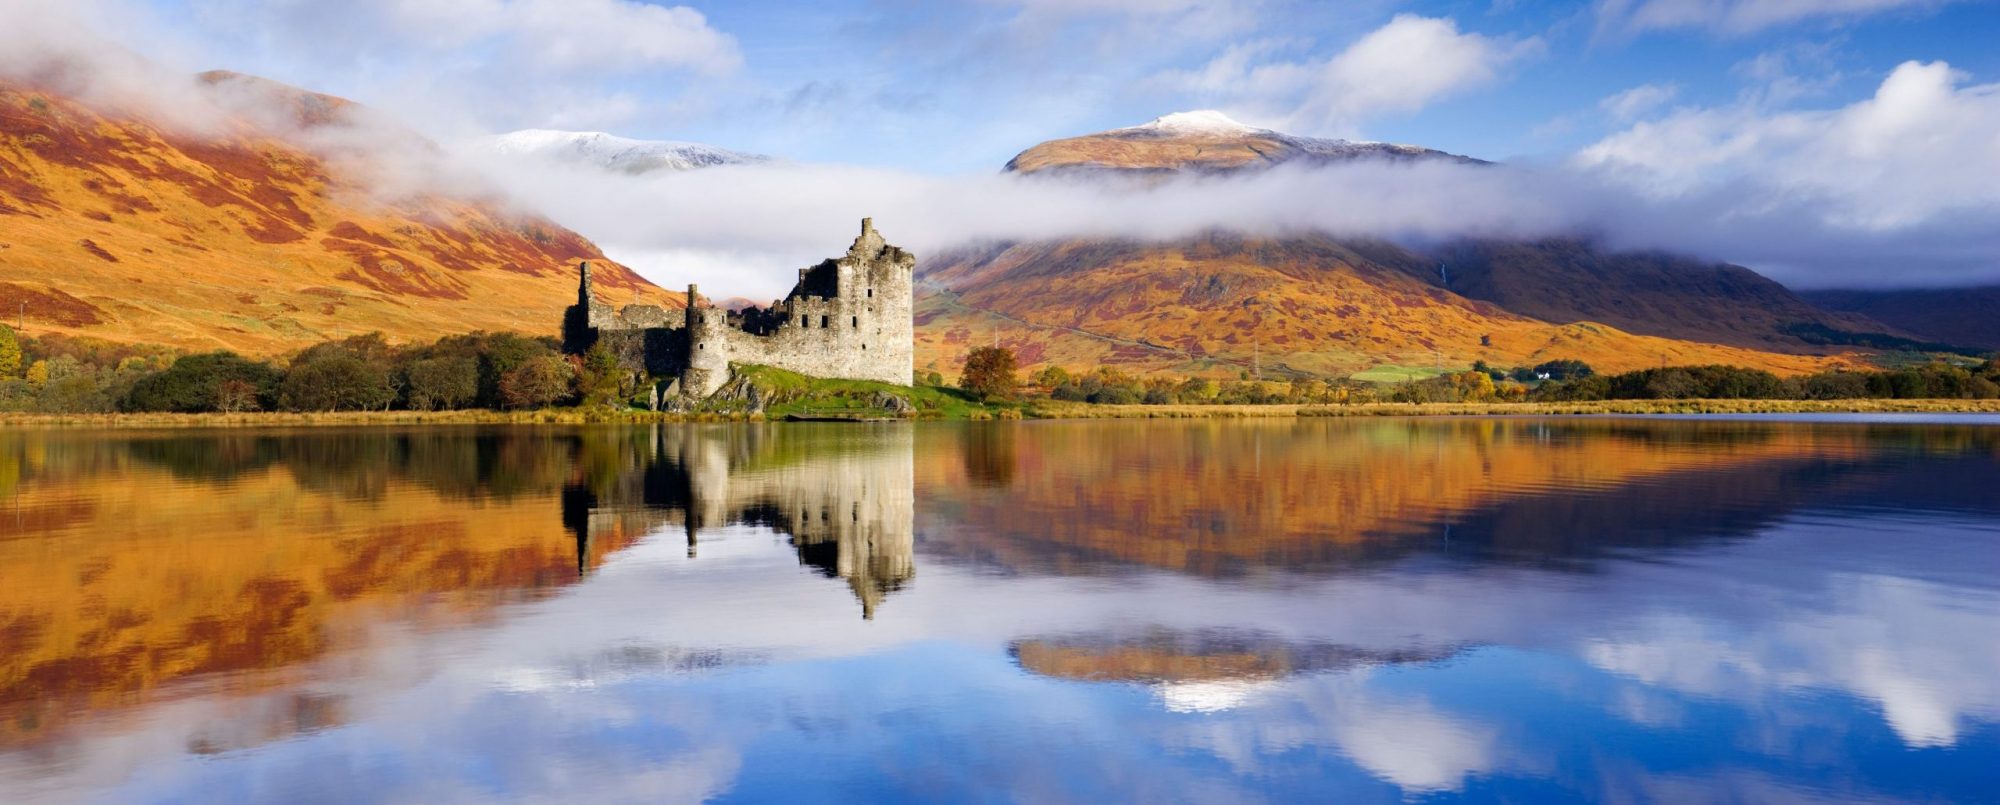 Kilchurn Purchased From Alamy Scaled Aspect Ratio X